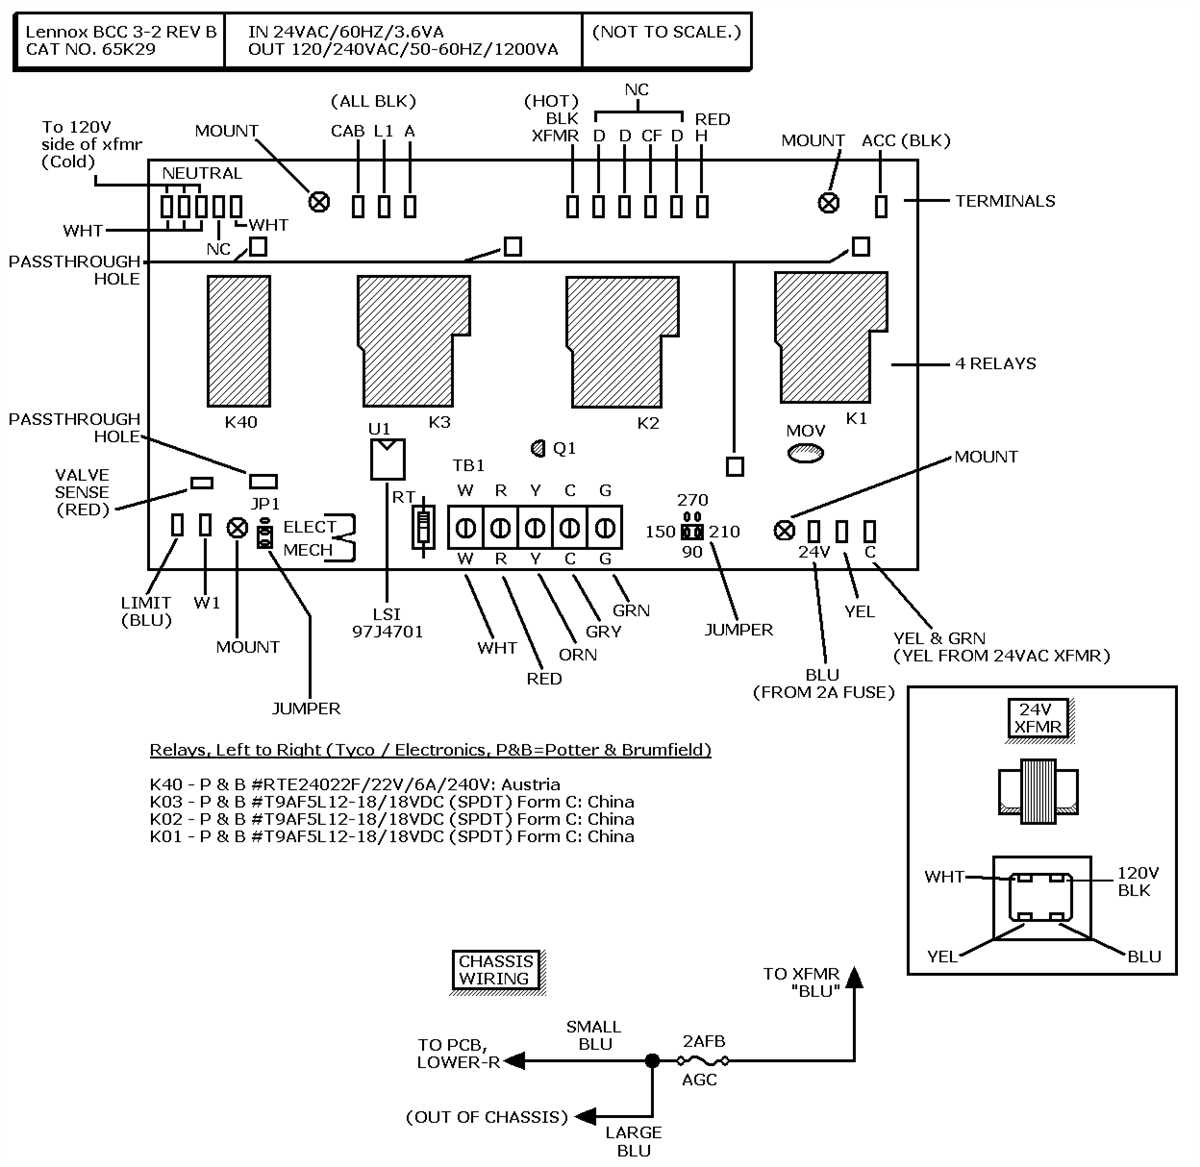 Understanding Lennox Thermostat Wiring Diagram: A Complete Guide